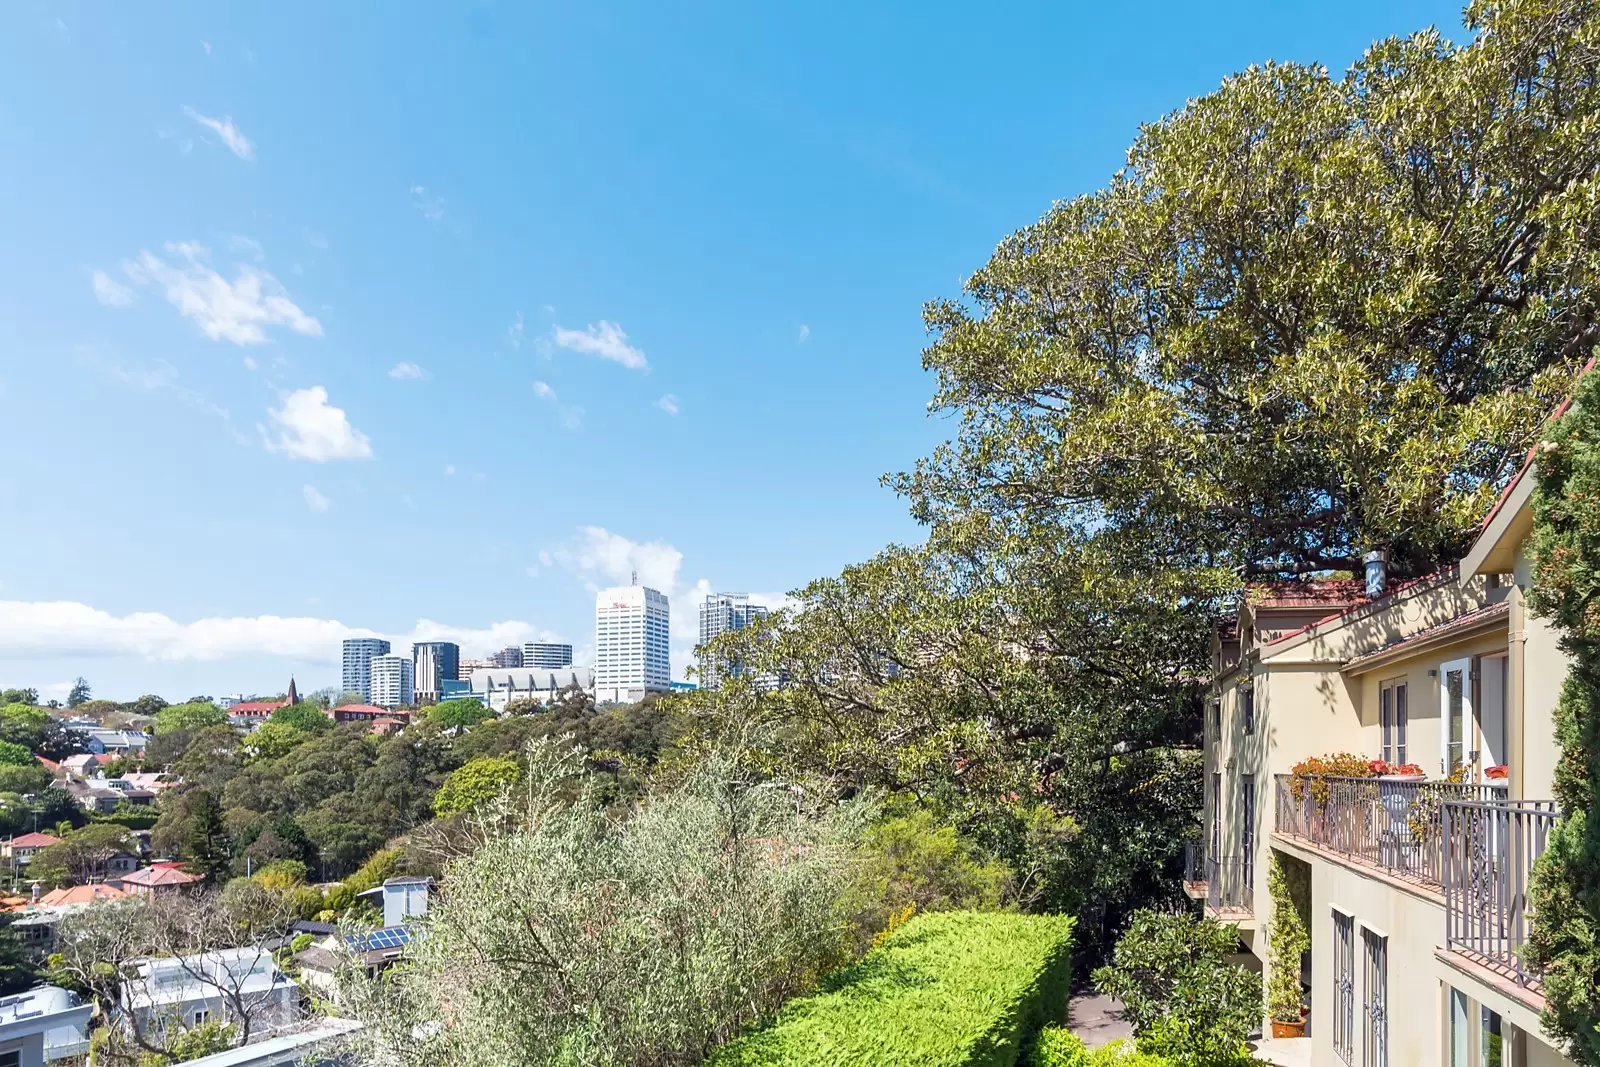 Photo #17: 31 Chester Street, Woollahra - Sold by Sydney Sotheby's International Realty